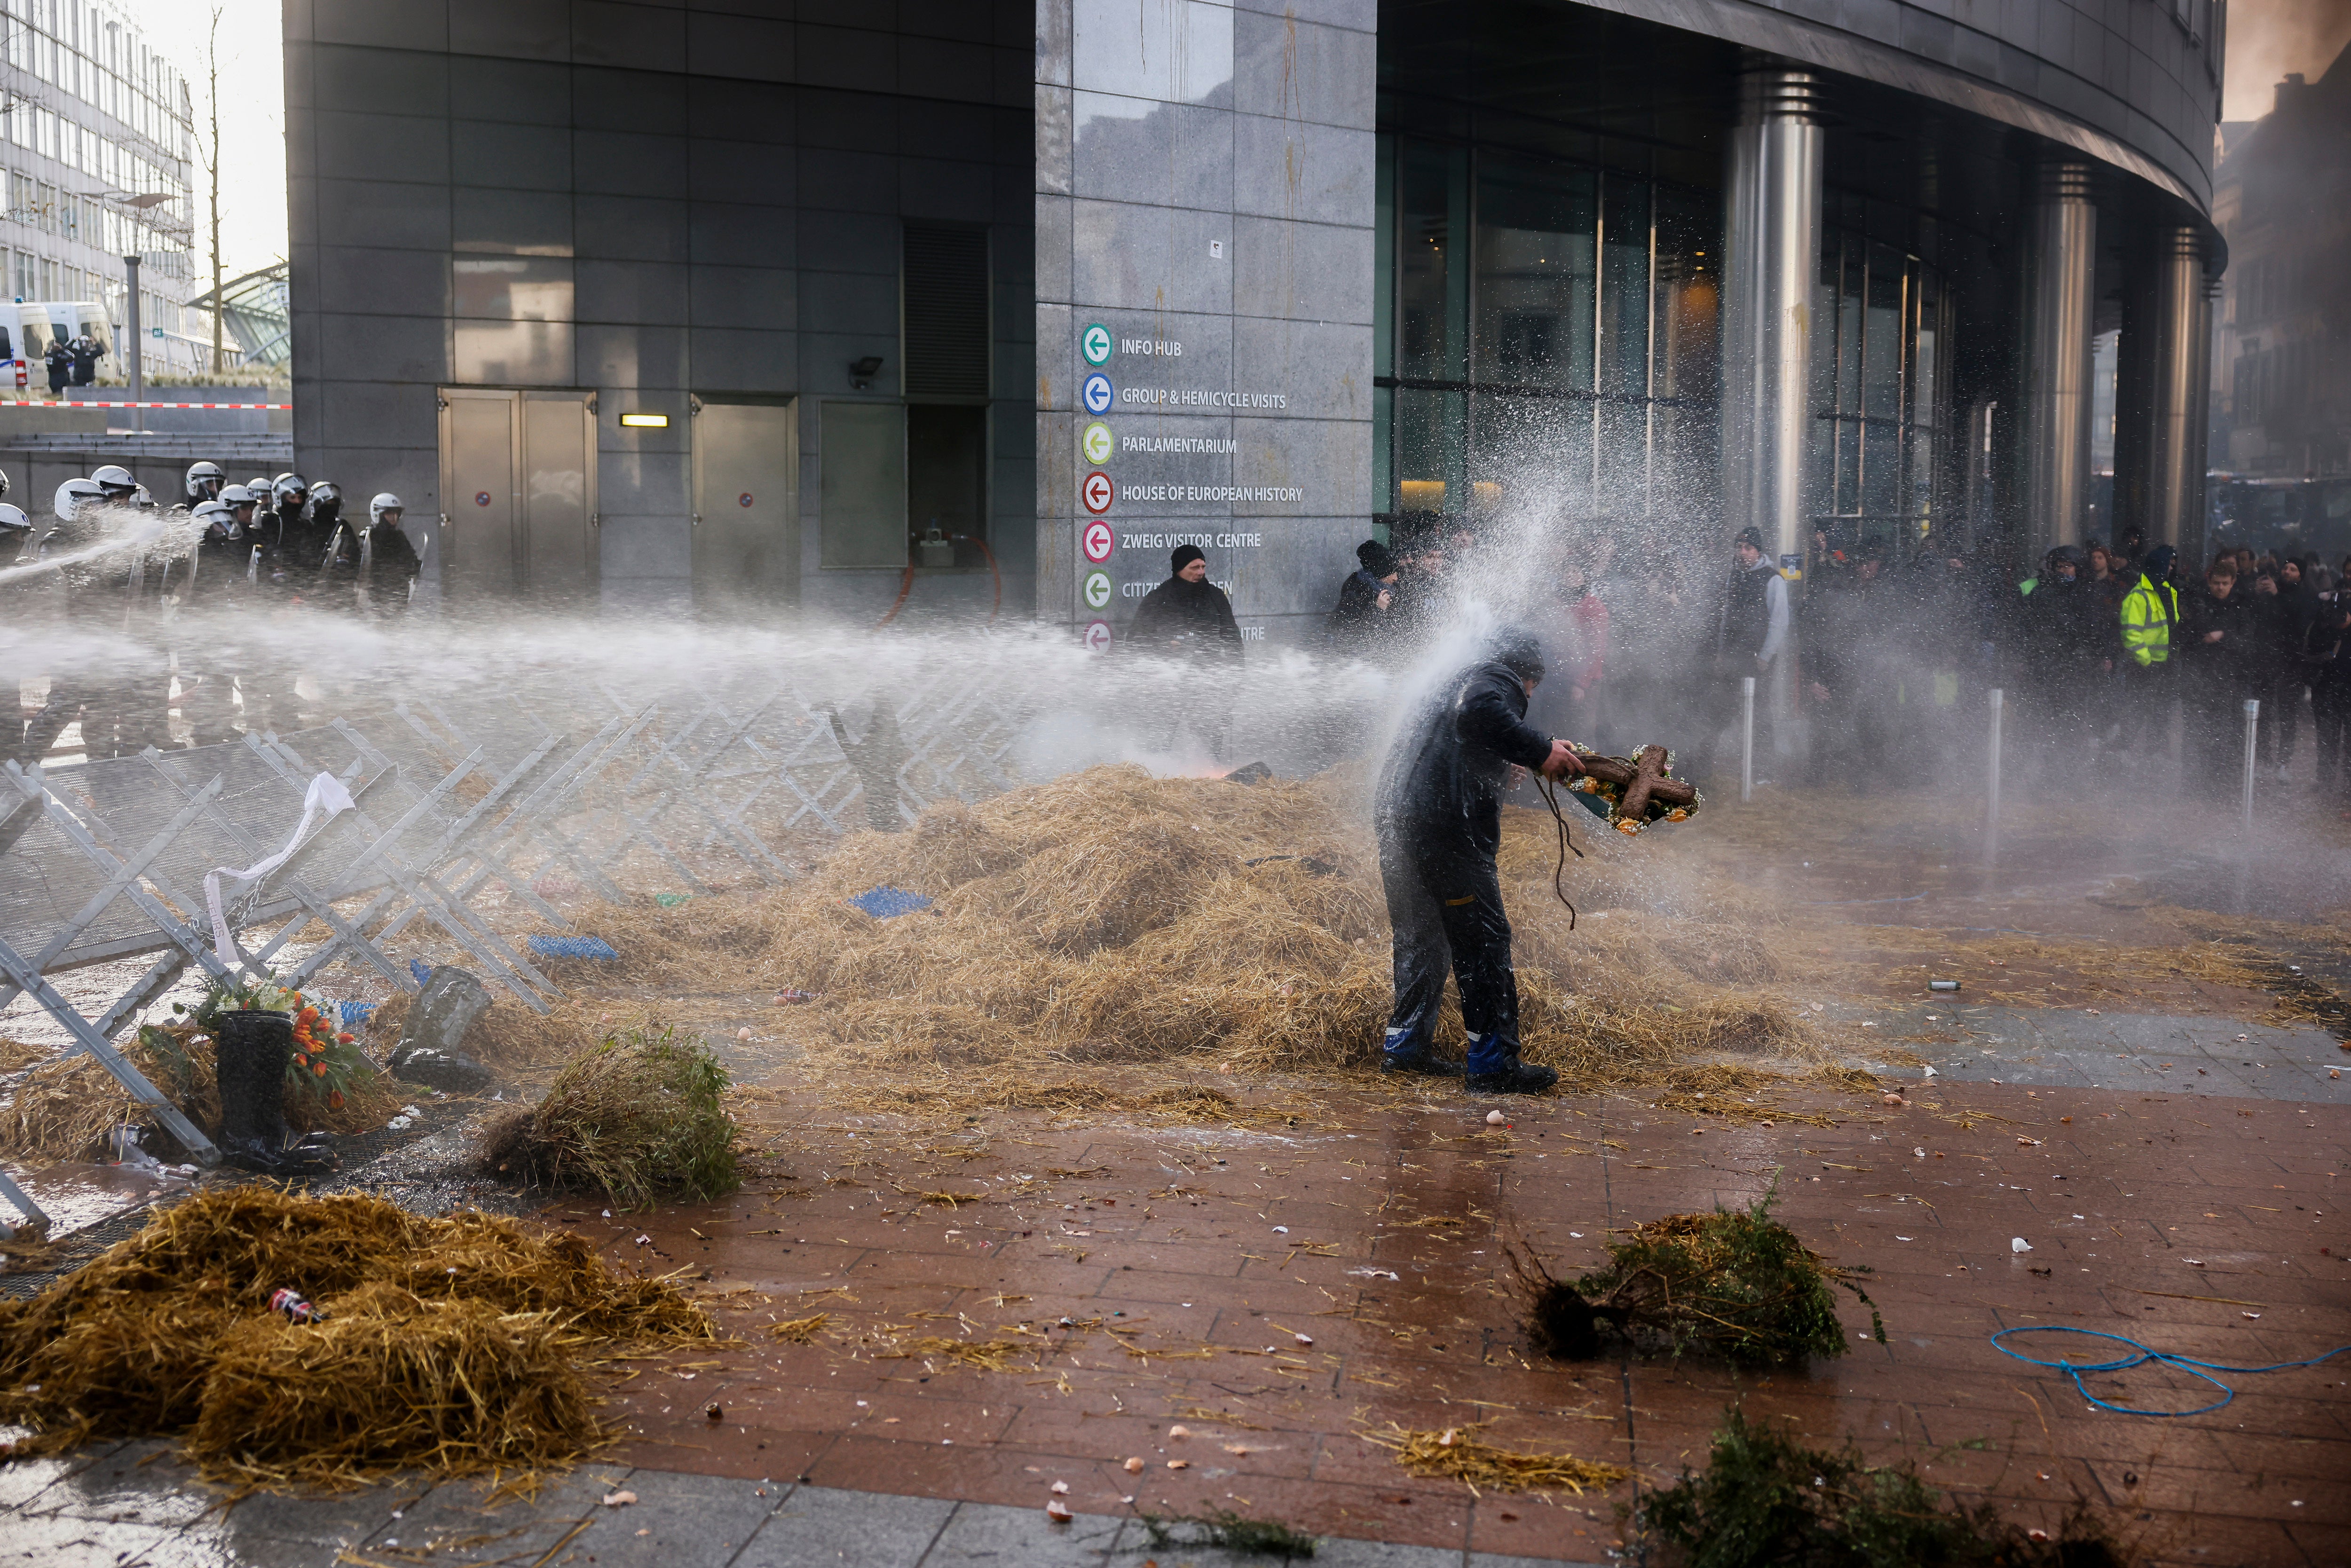 Anti-riot police use water to disperse people during a protest by farmers outside the European parliament in Brussels